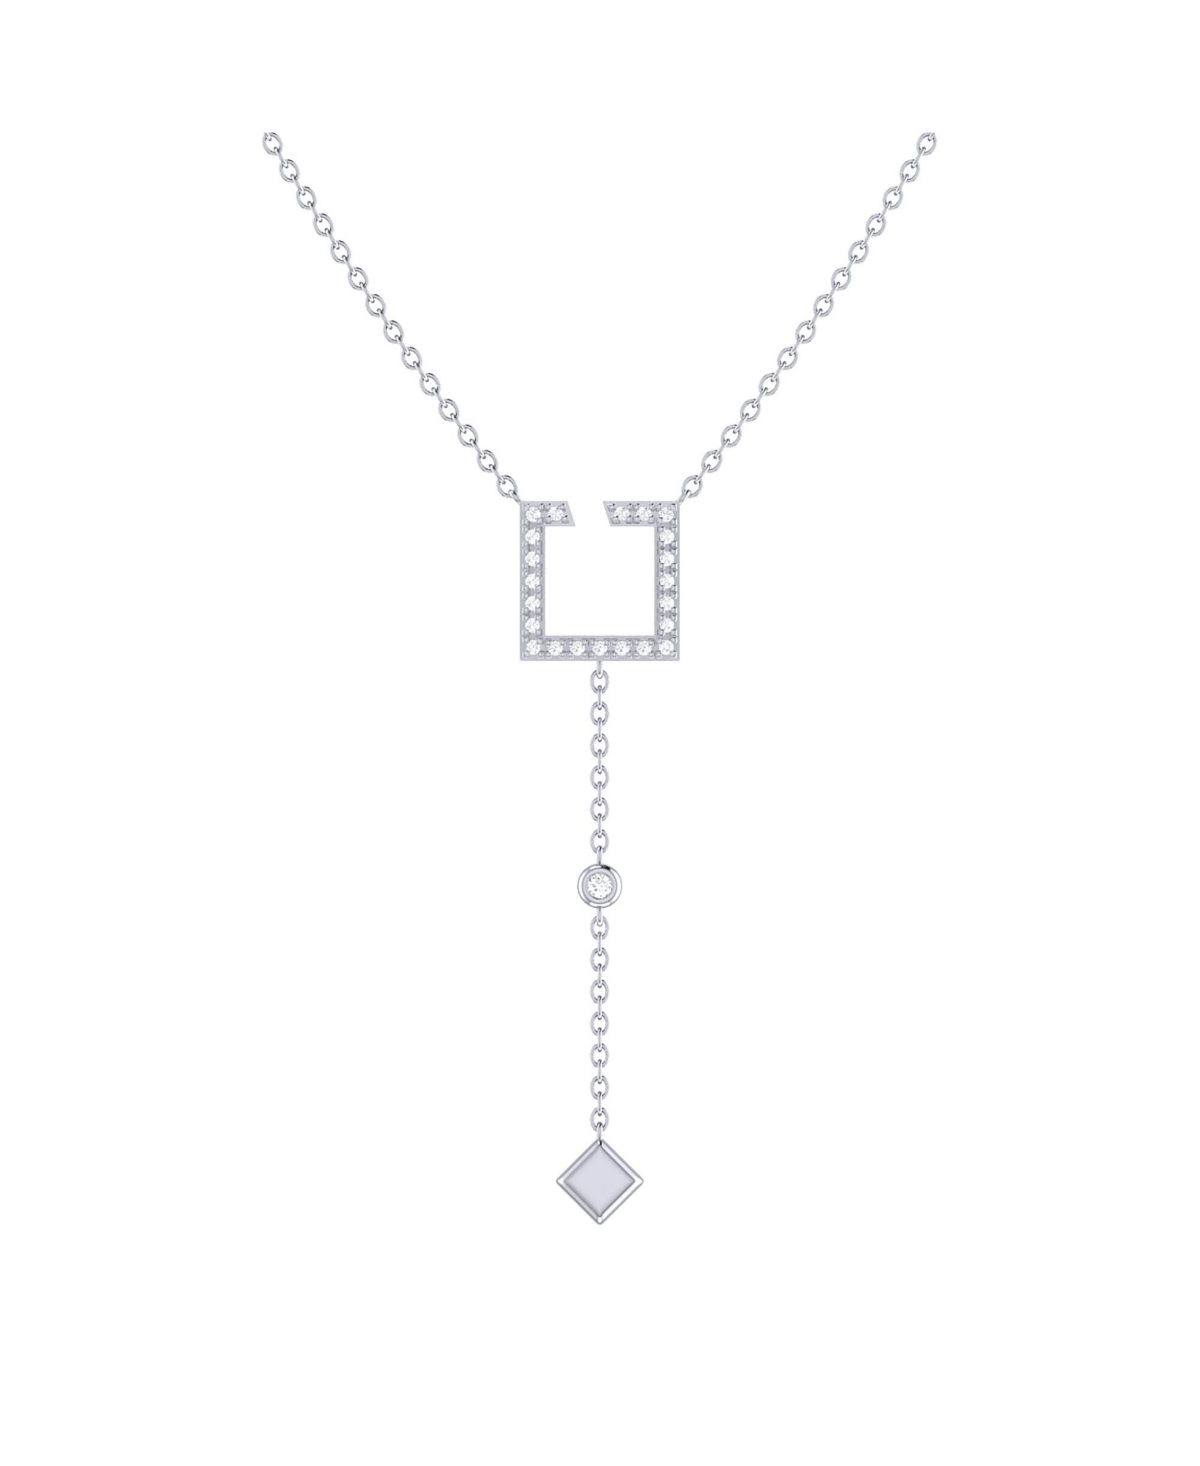 LUVMYJEWELRY STREET LIGHT OPEN SQUARE BOLO ADJUSTABLE STERLING SILVER DIAMOND LARIAT NECKLACE